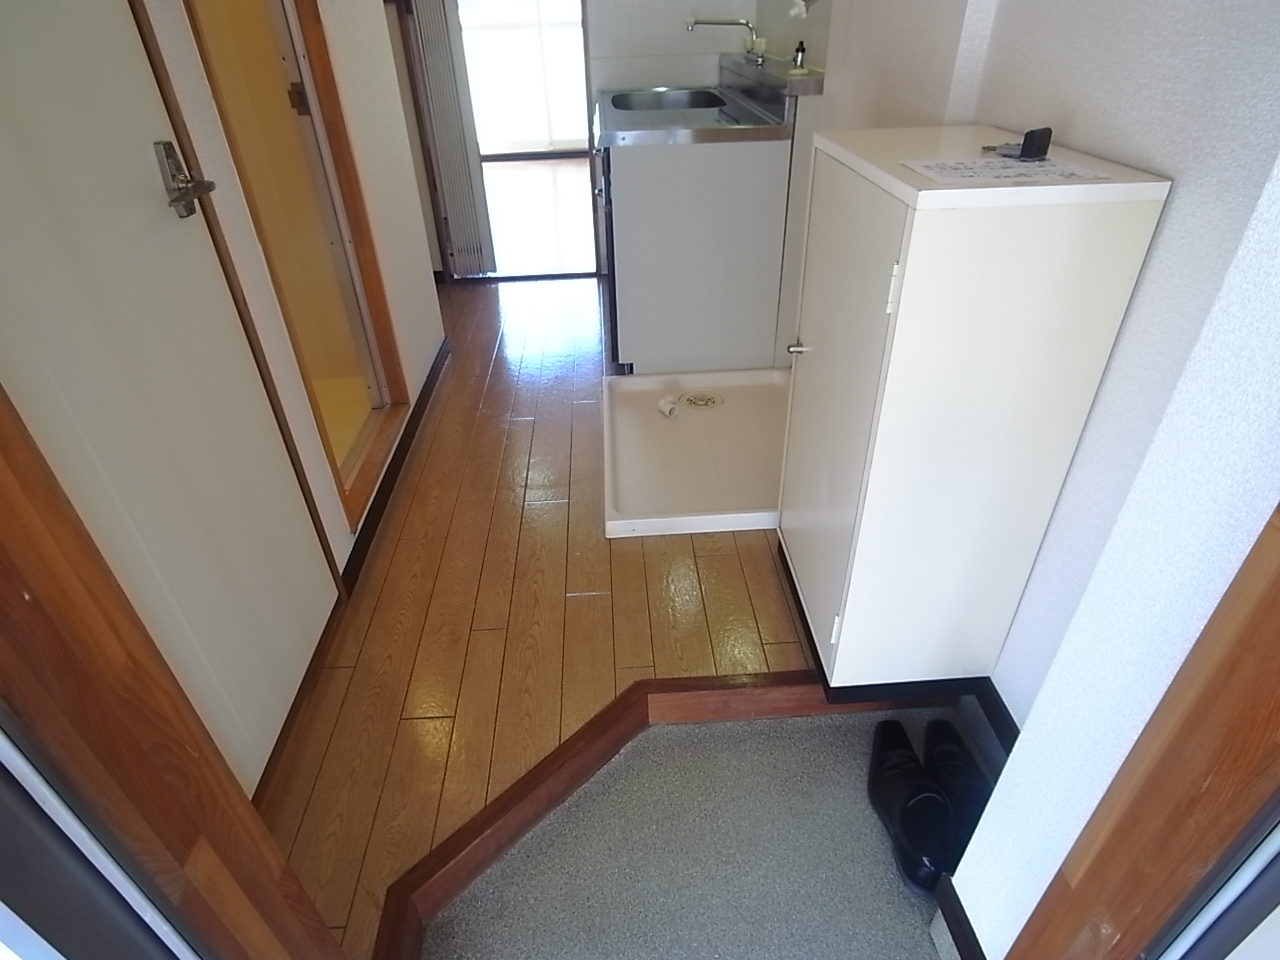 Other room space. It will clean up the entrance because there is a shoebox